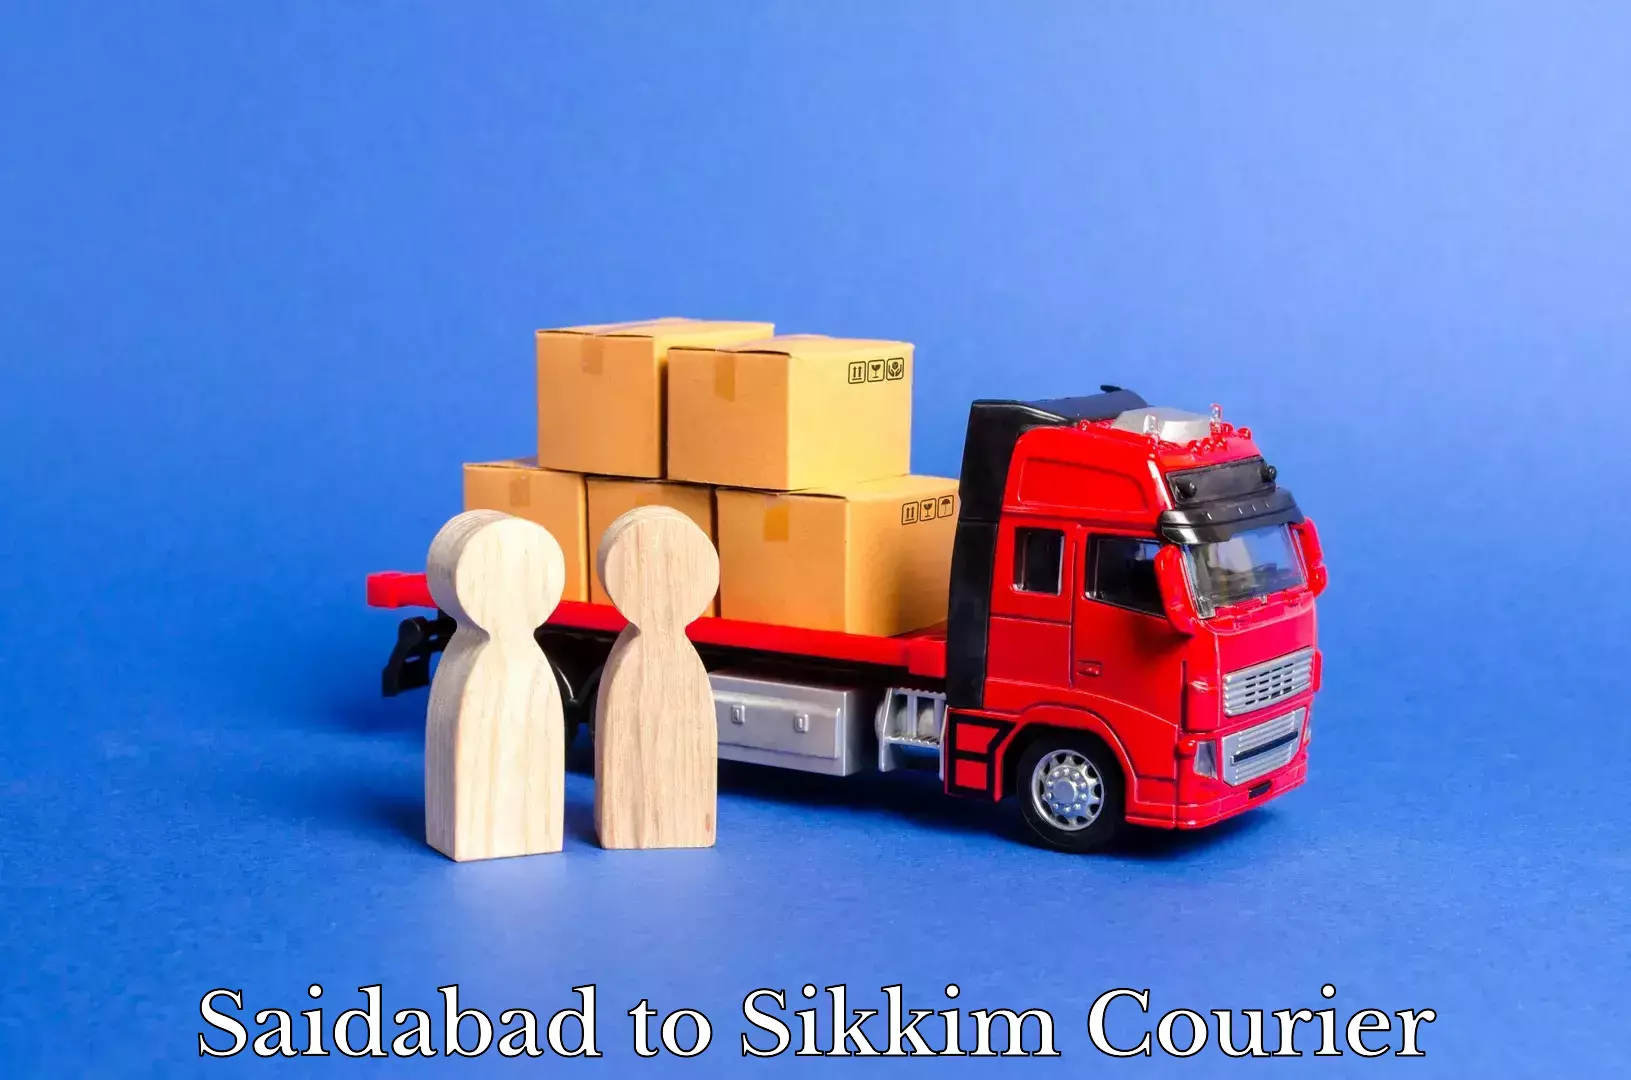 Cash on delivery service Saidabad to Sikkim